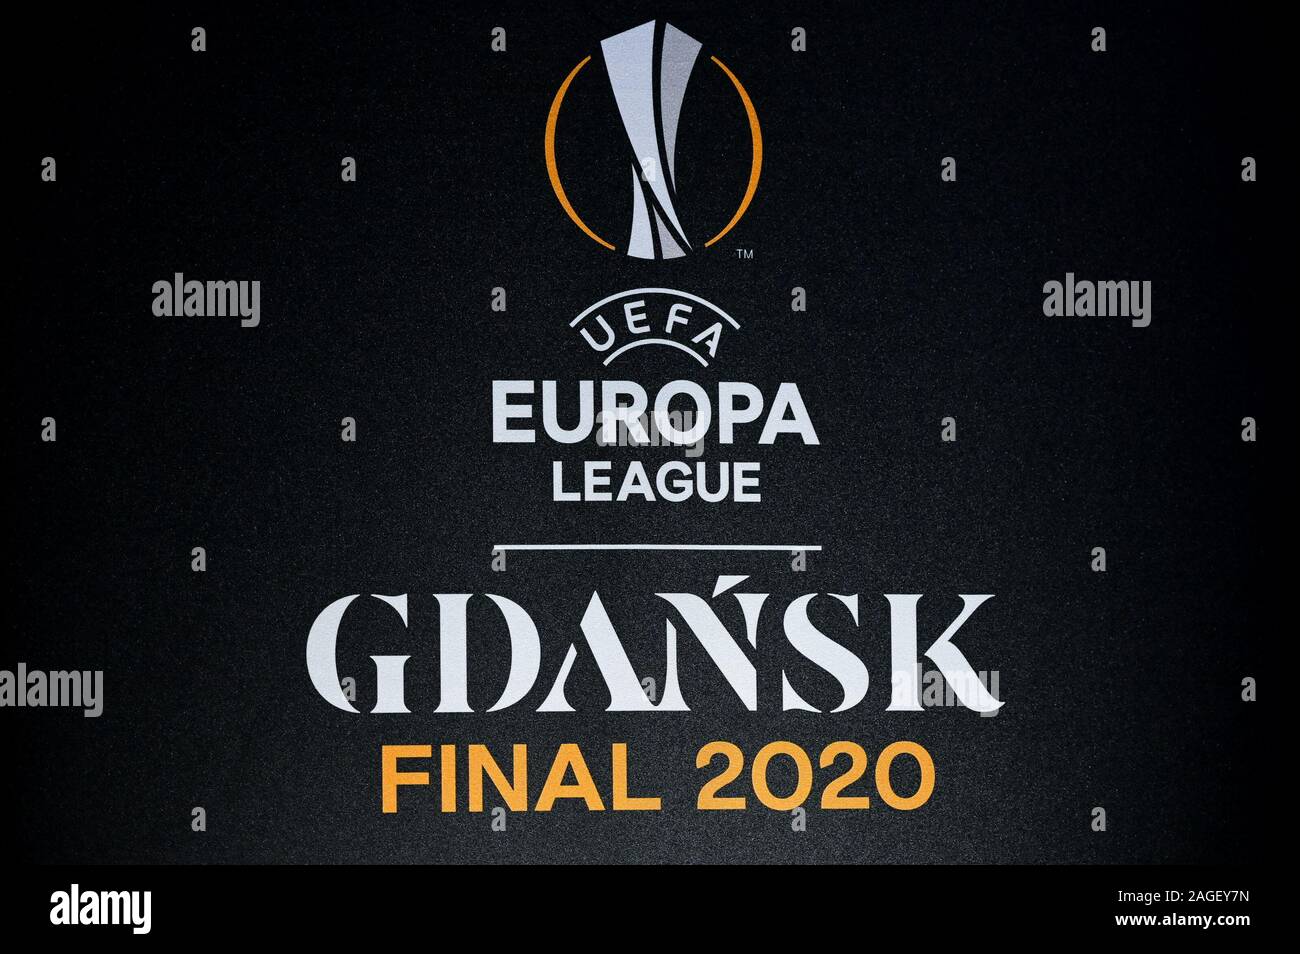 Gdansk, Poland. 18th Dec, 2019. UEFA Europa League Final 2020 Gdansk logo.The 2020 UEFA Europa League Final will be the final match of the 2019-20 UEFA Europa League, the 49th season of Europe's secondary club football tournament organised by UEFA, and the 11th season since it was renamed from the UEFA Cup to the UEFA Europa League. It will be played at the Stadion Energa Gdansk in Gdansk, Poland on 27 May 2020. Credit: SOPA Images Limited/Alamy Live News Stock Photo